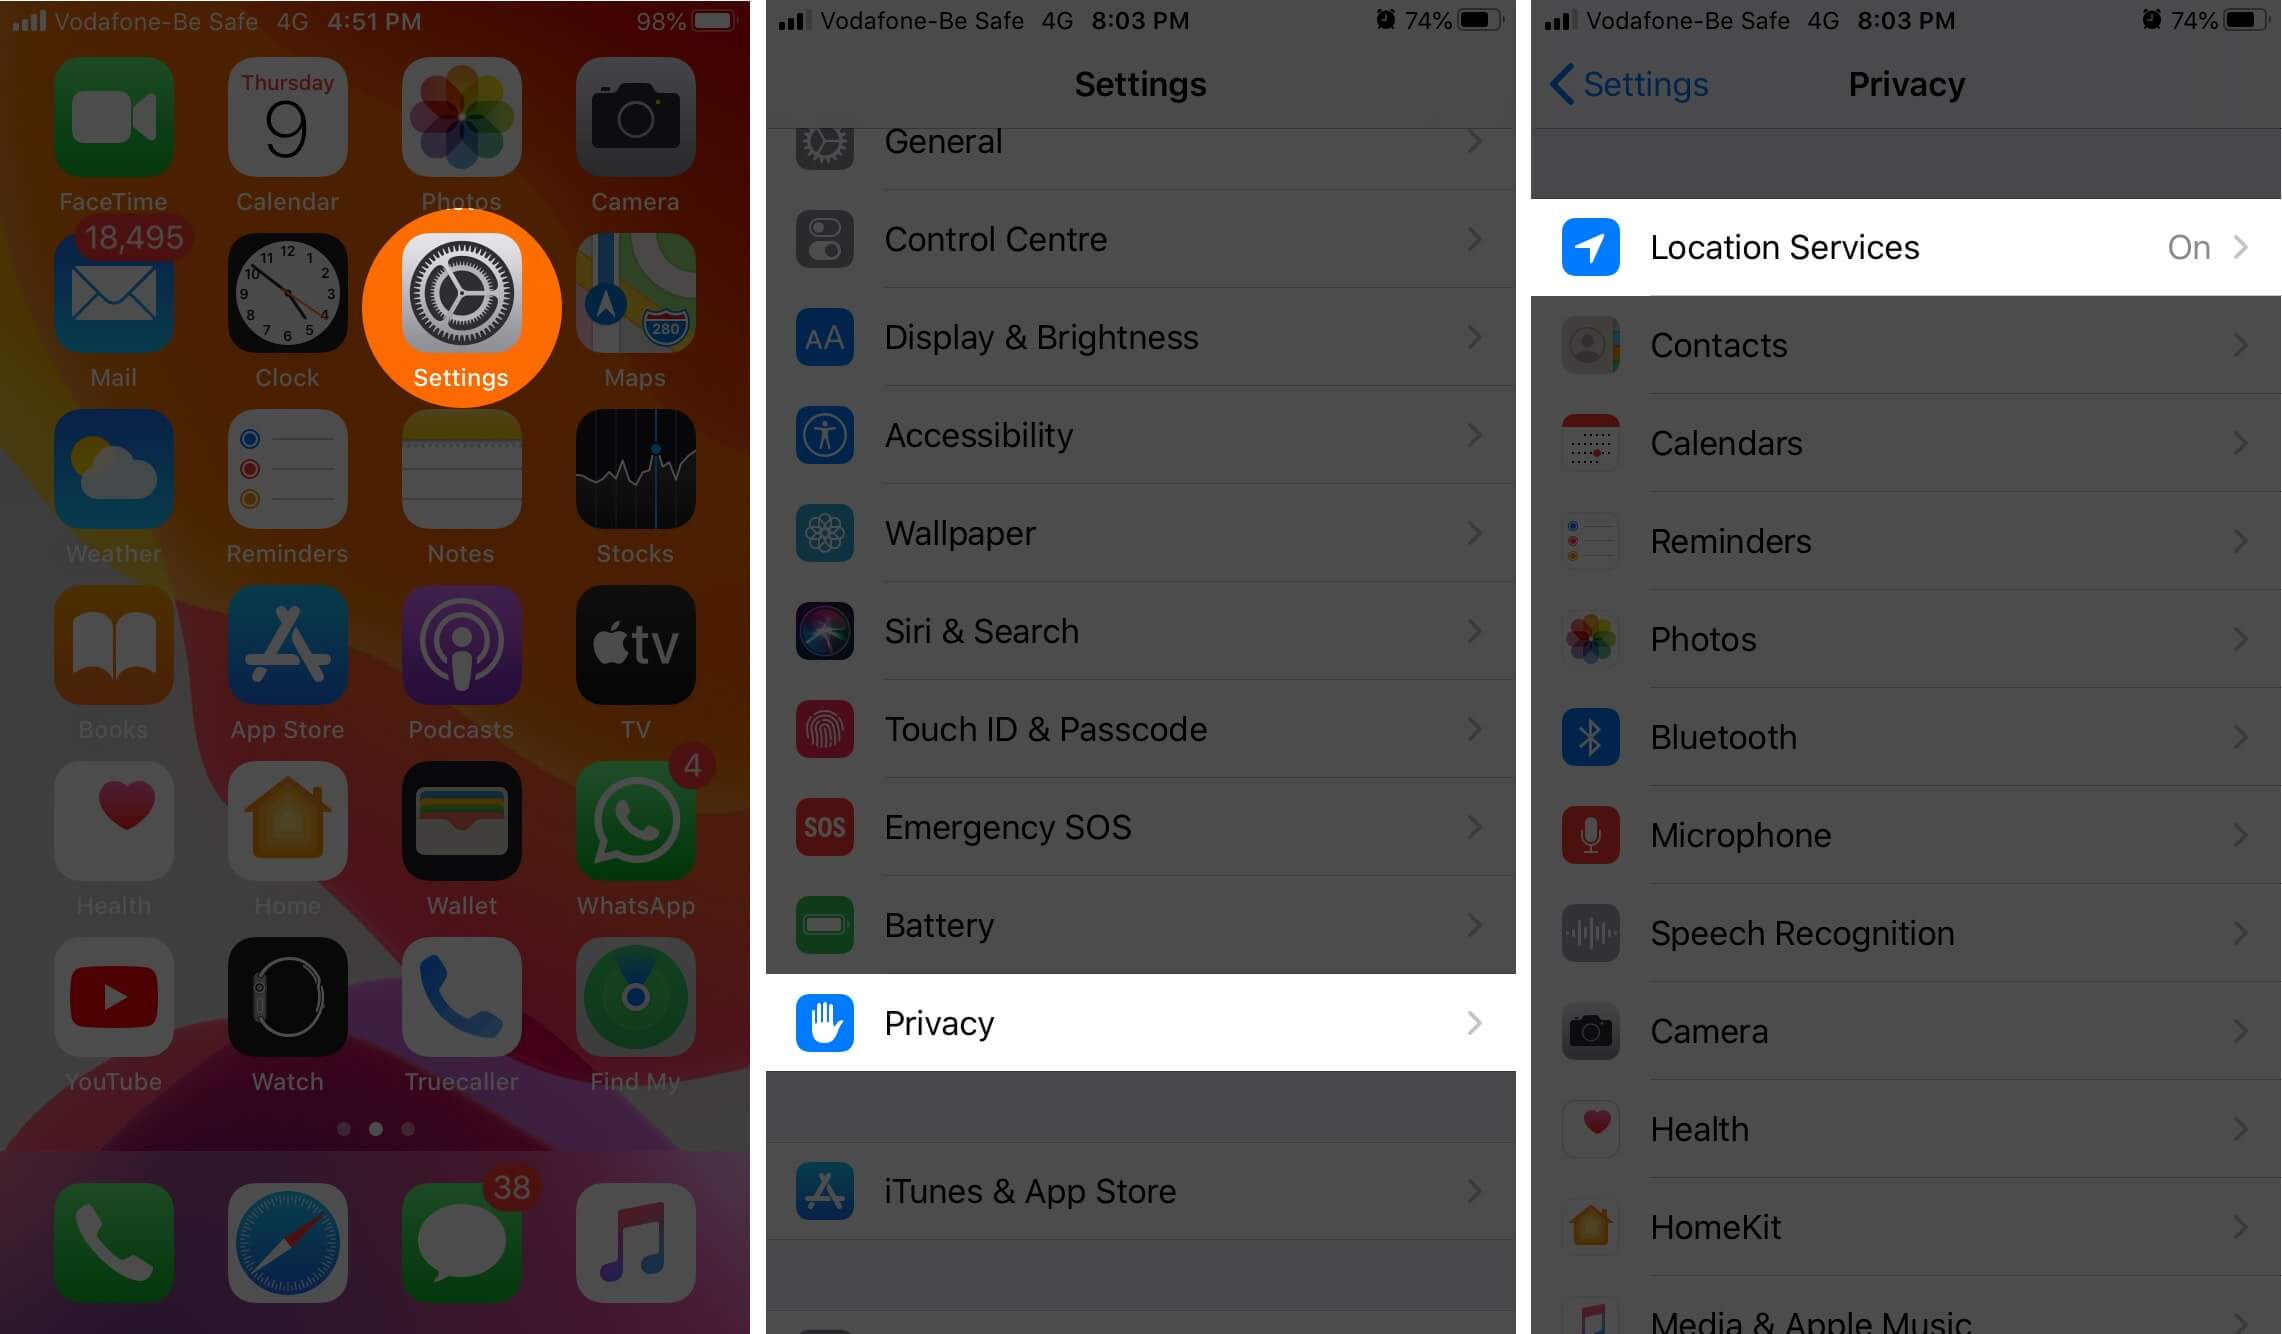 Open Settings Tap on Privacy and Location Services